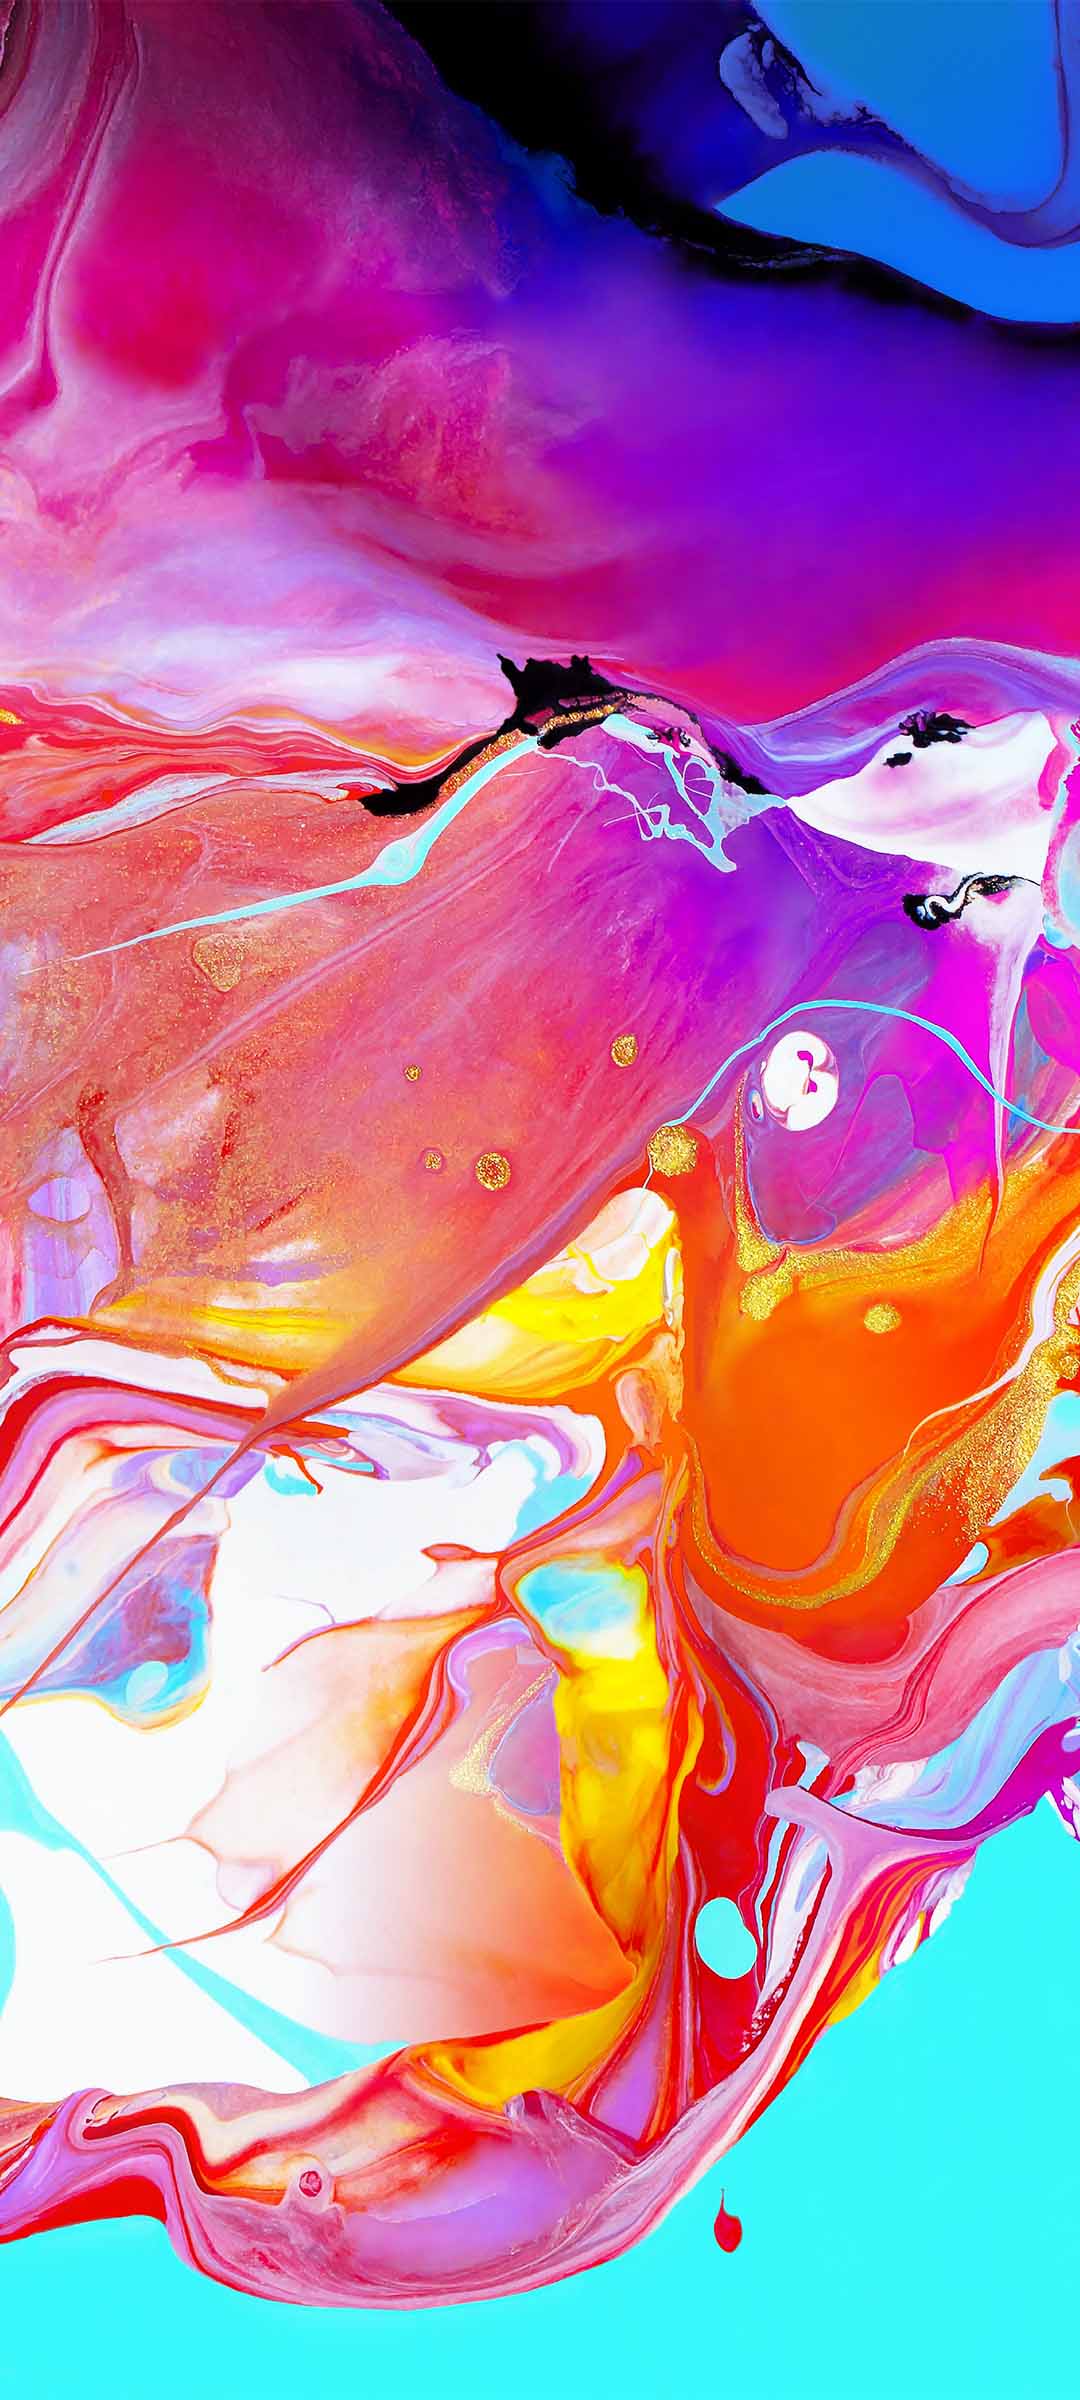 Samsung Galaxy A70 Wallpapers (FHD+) - Download | DroidViews